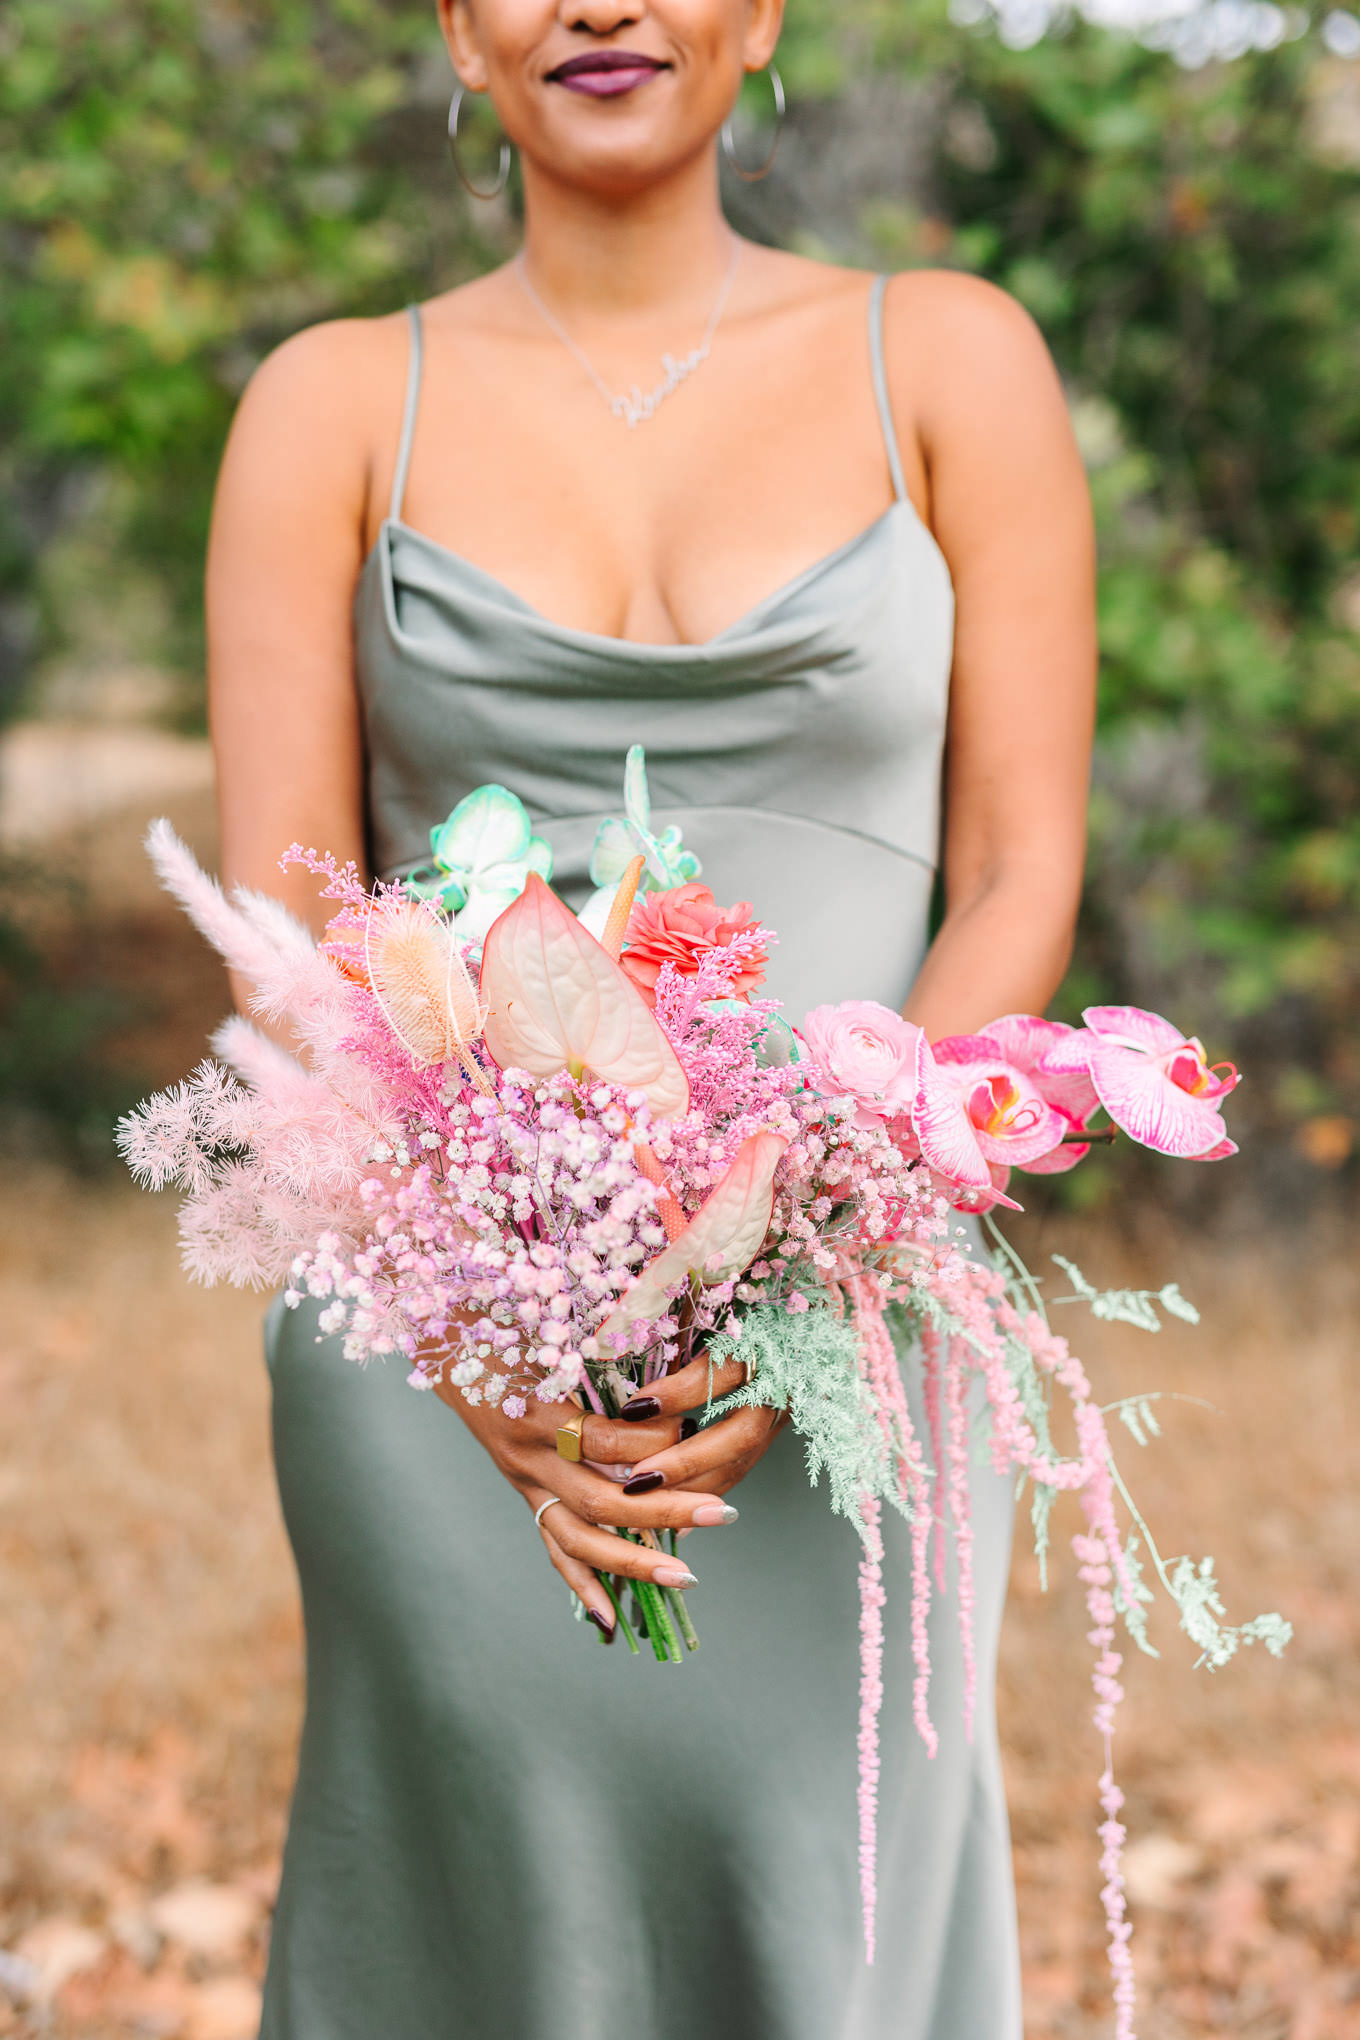 Bridesmaid in sage green gowns with colorful bouquets | Colorful and quirky wedding at Higuera Ranch in San Luis Obispo | #sanluisobispowedding #californiawedding #higueraranch #madonnainn   
Source: Mary Costa Photography | Los Angeles